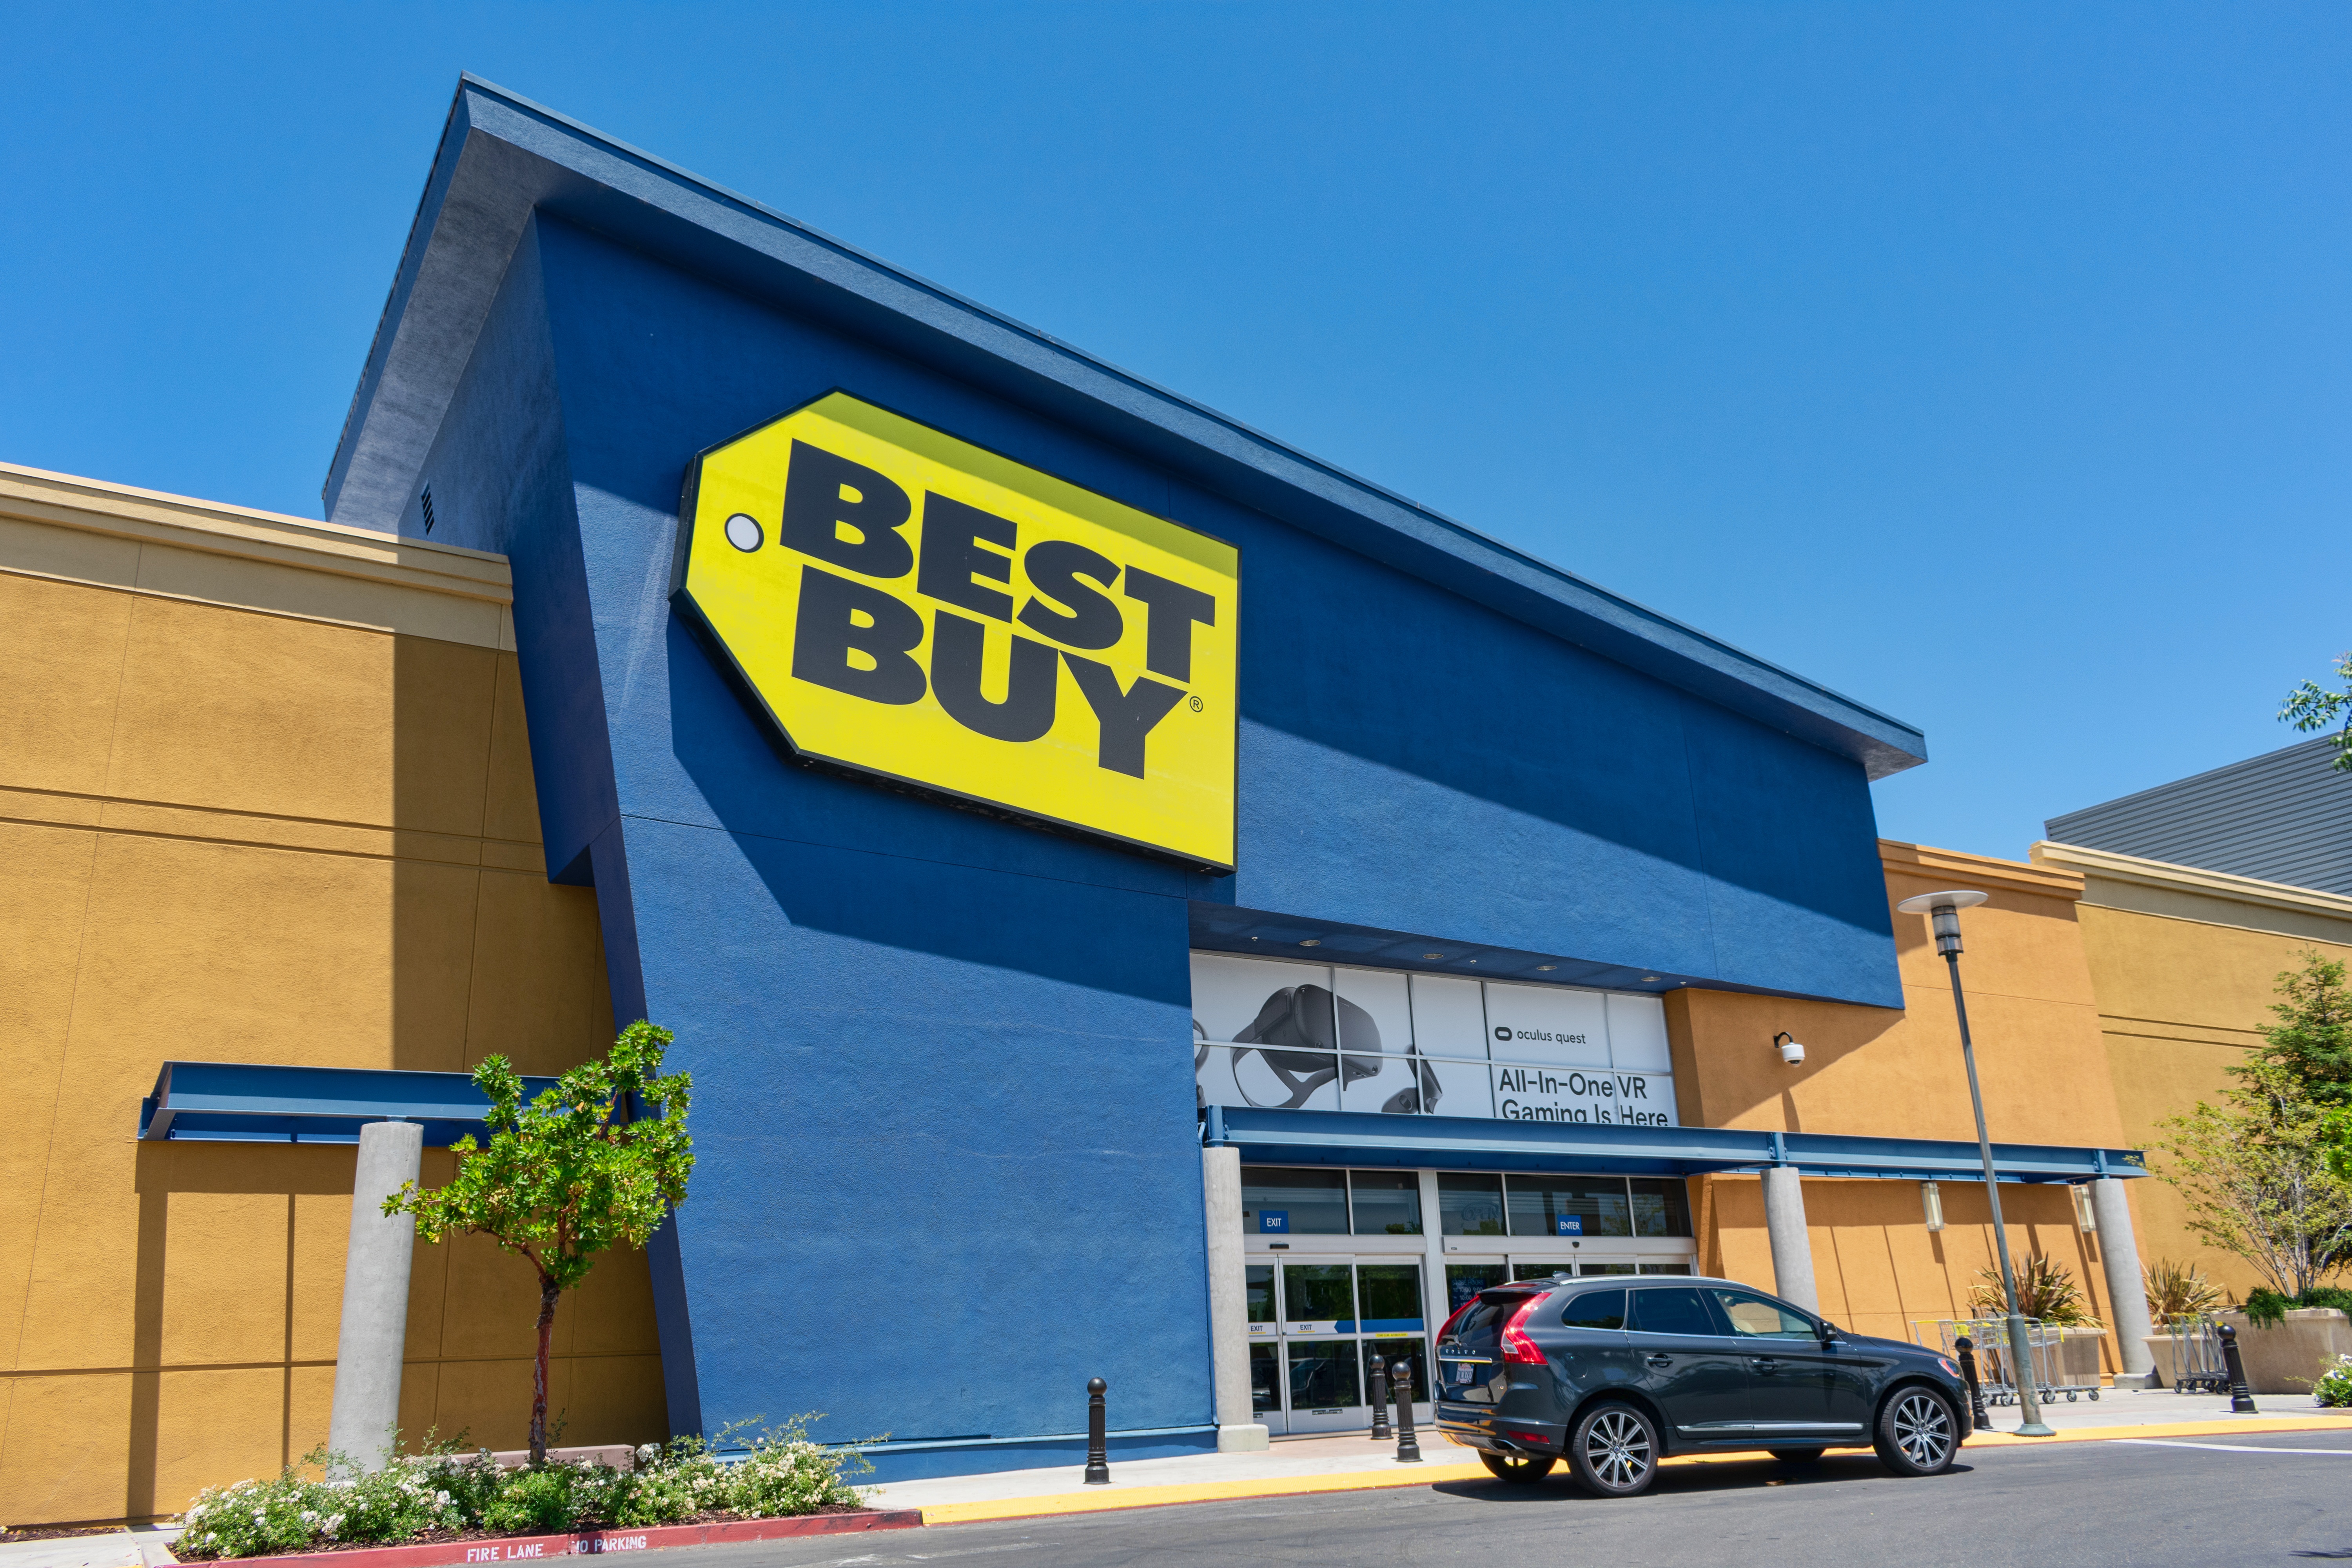 Best Buy Is Having A Sale This Week Too: Here Are Some of The Best Deals